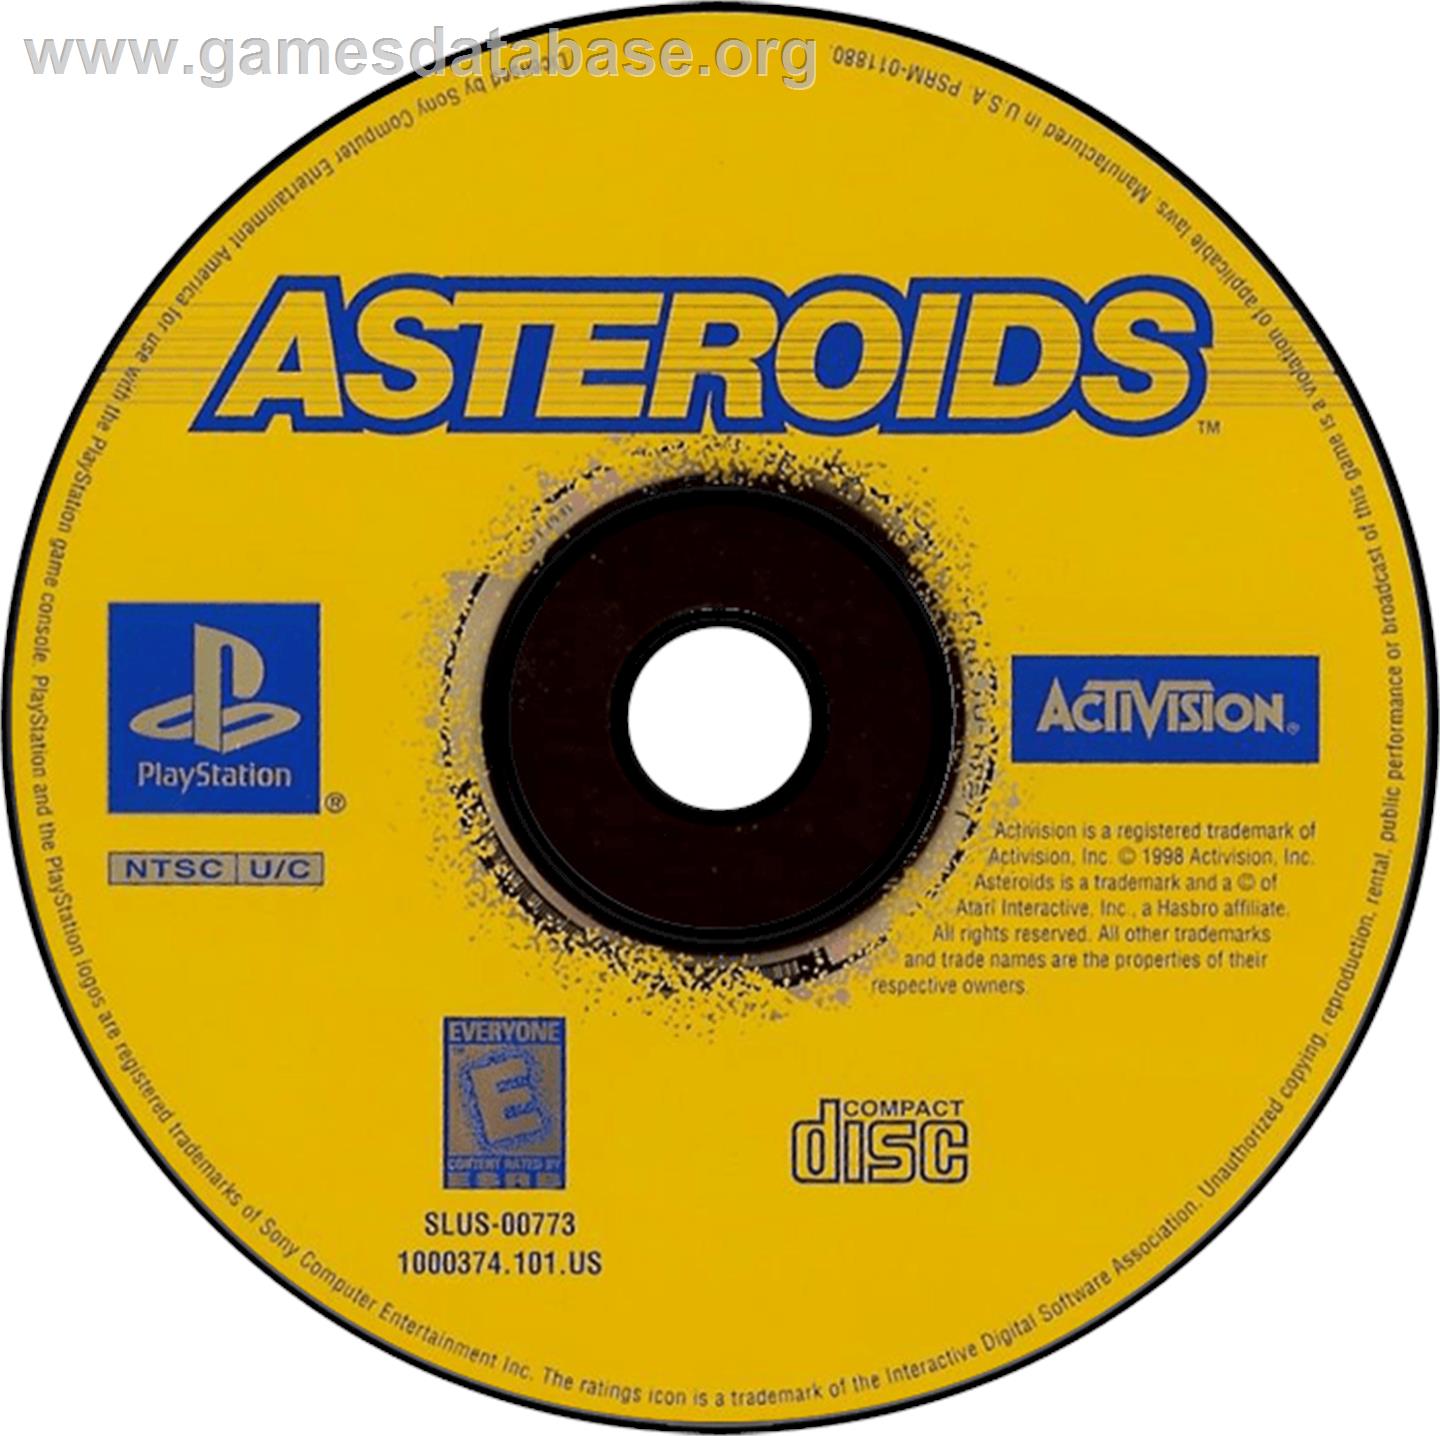 Asteroids - Sony Playstation - Artwork - Disc